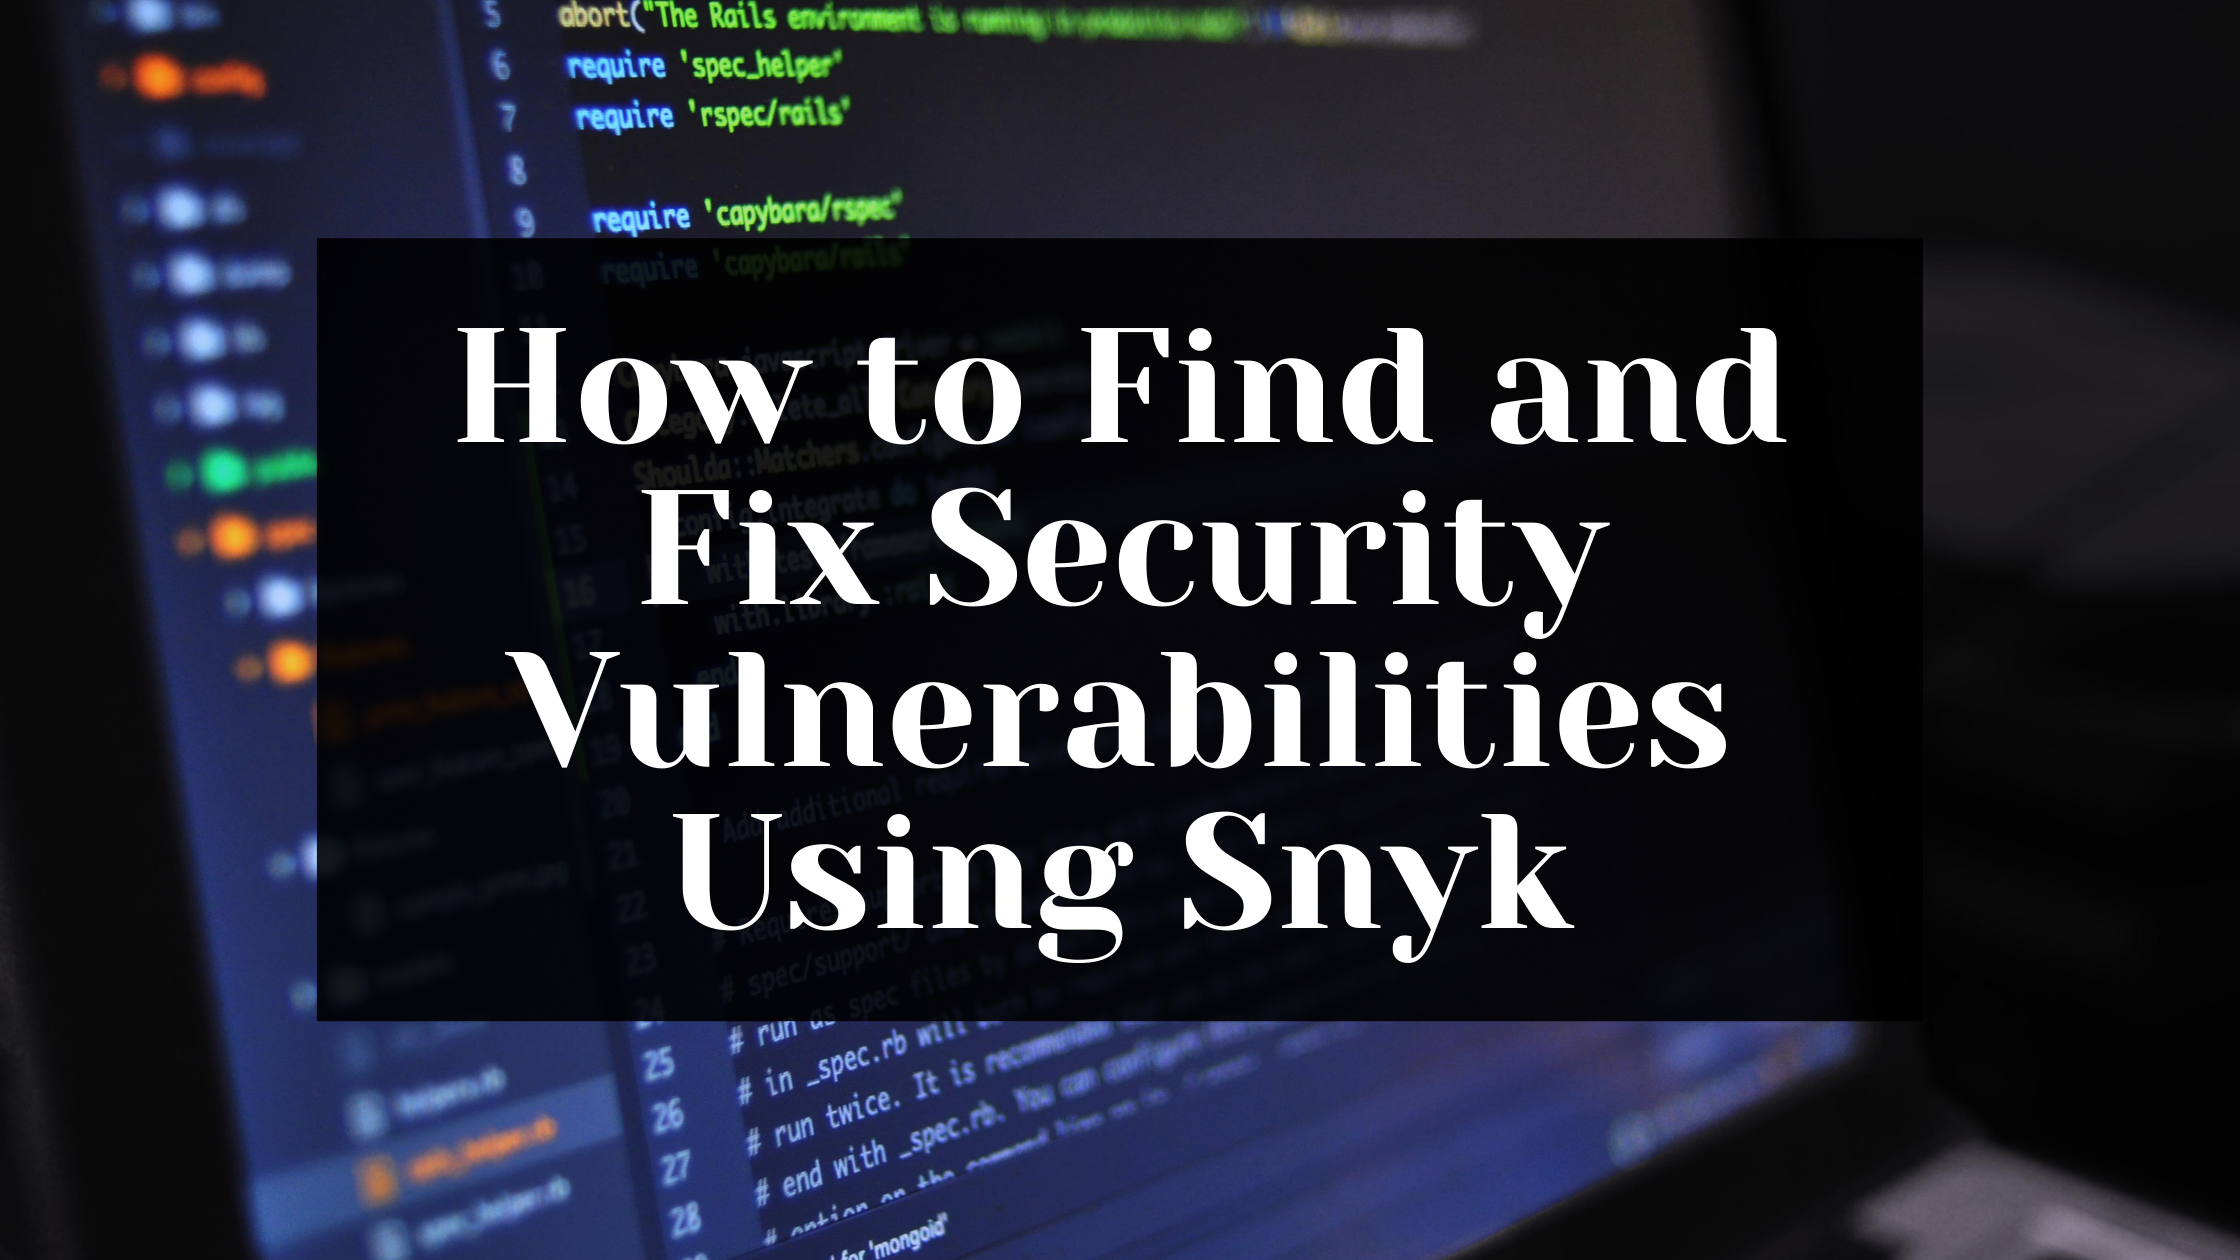 How to Find and Fix Security Vulnerabilities Using Snyk